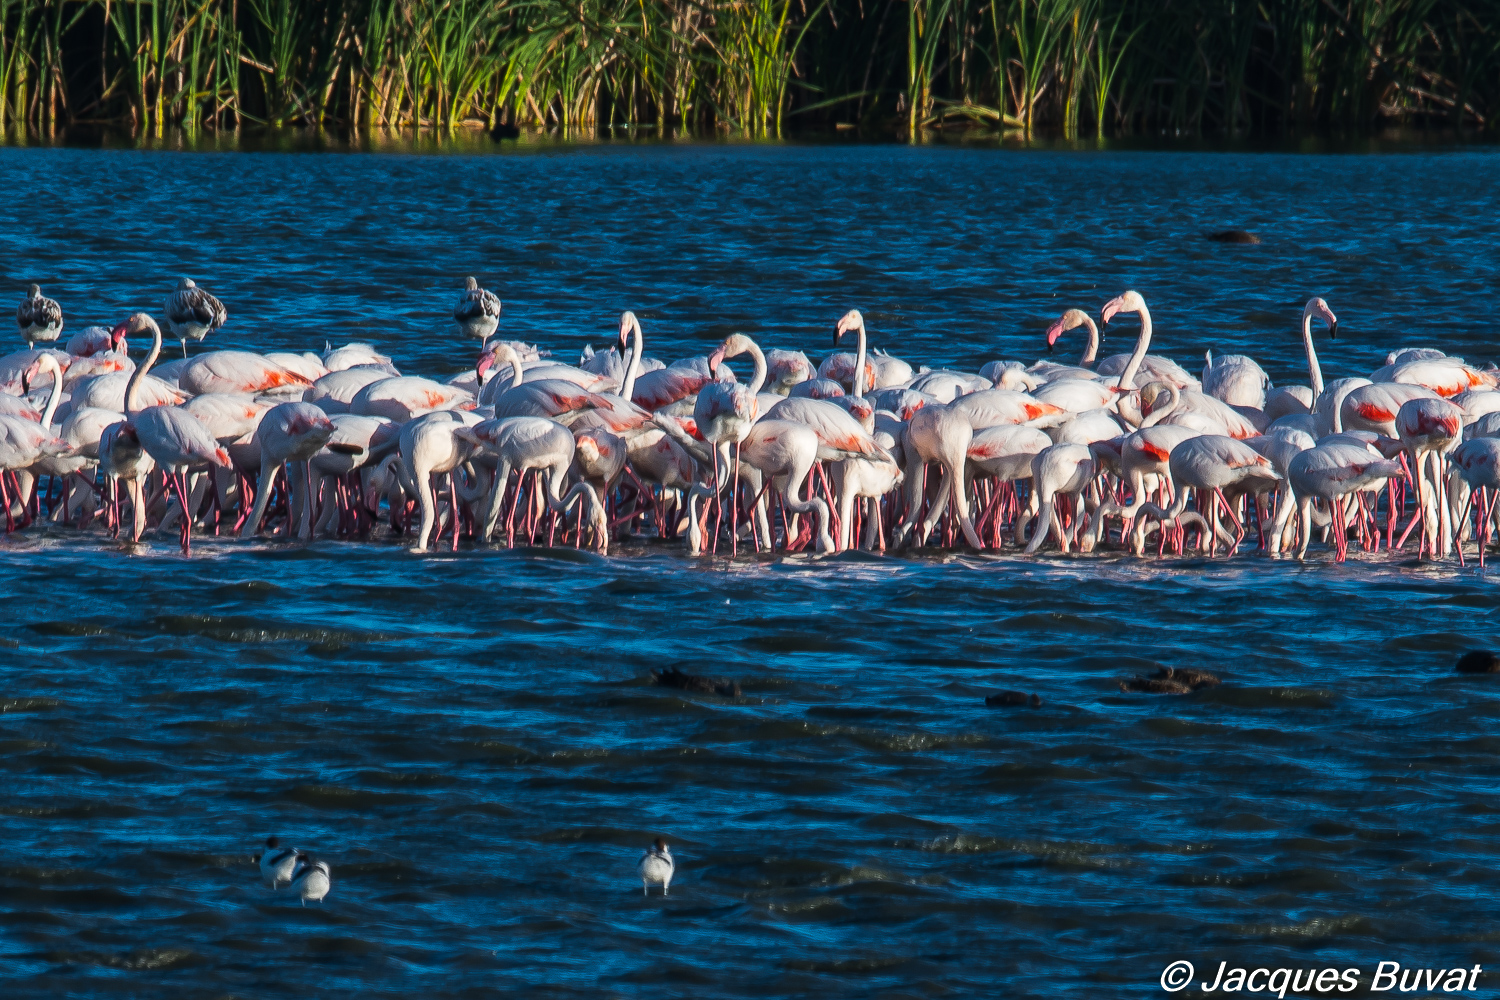 Flamants roses (Greater flamingo, Phoenicopterus roseus),adultes et juvéniles, Strandfontain sewer works.